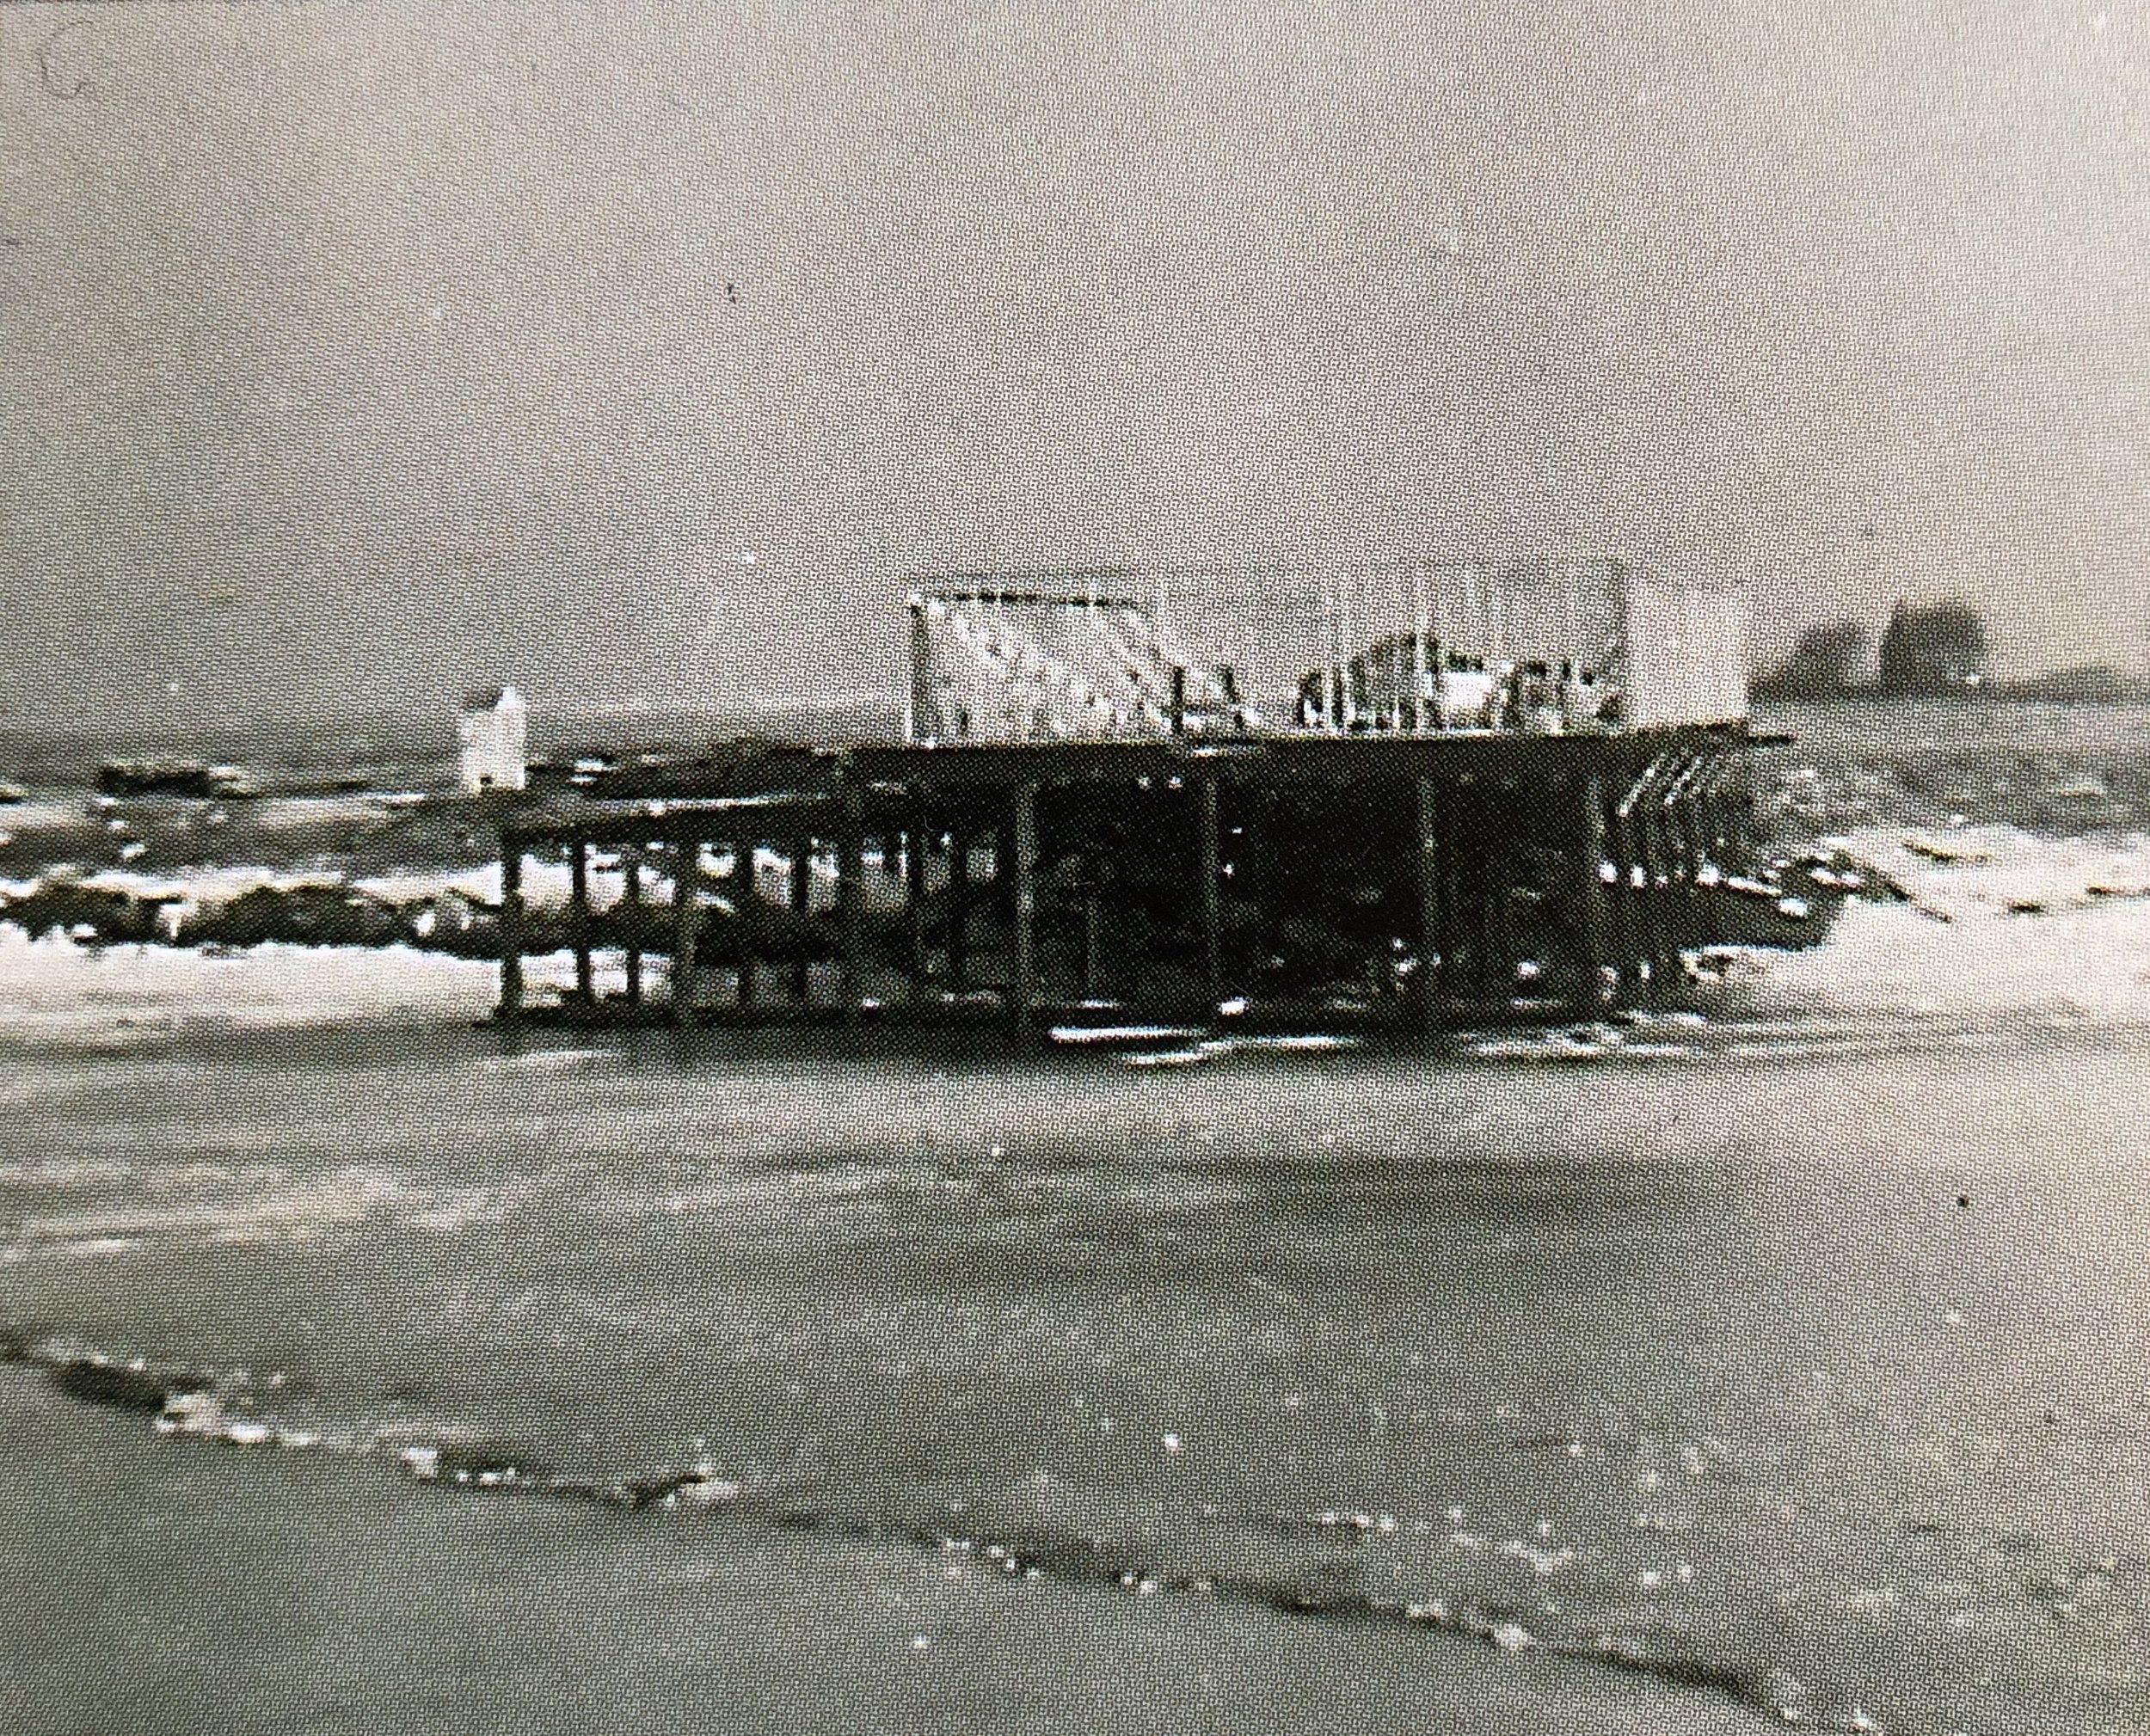 Construction of the fish house began 12/31/1943